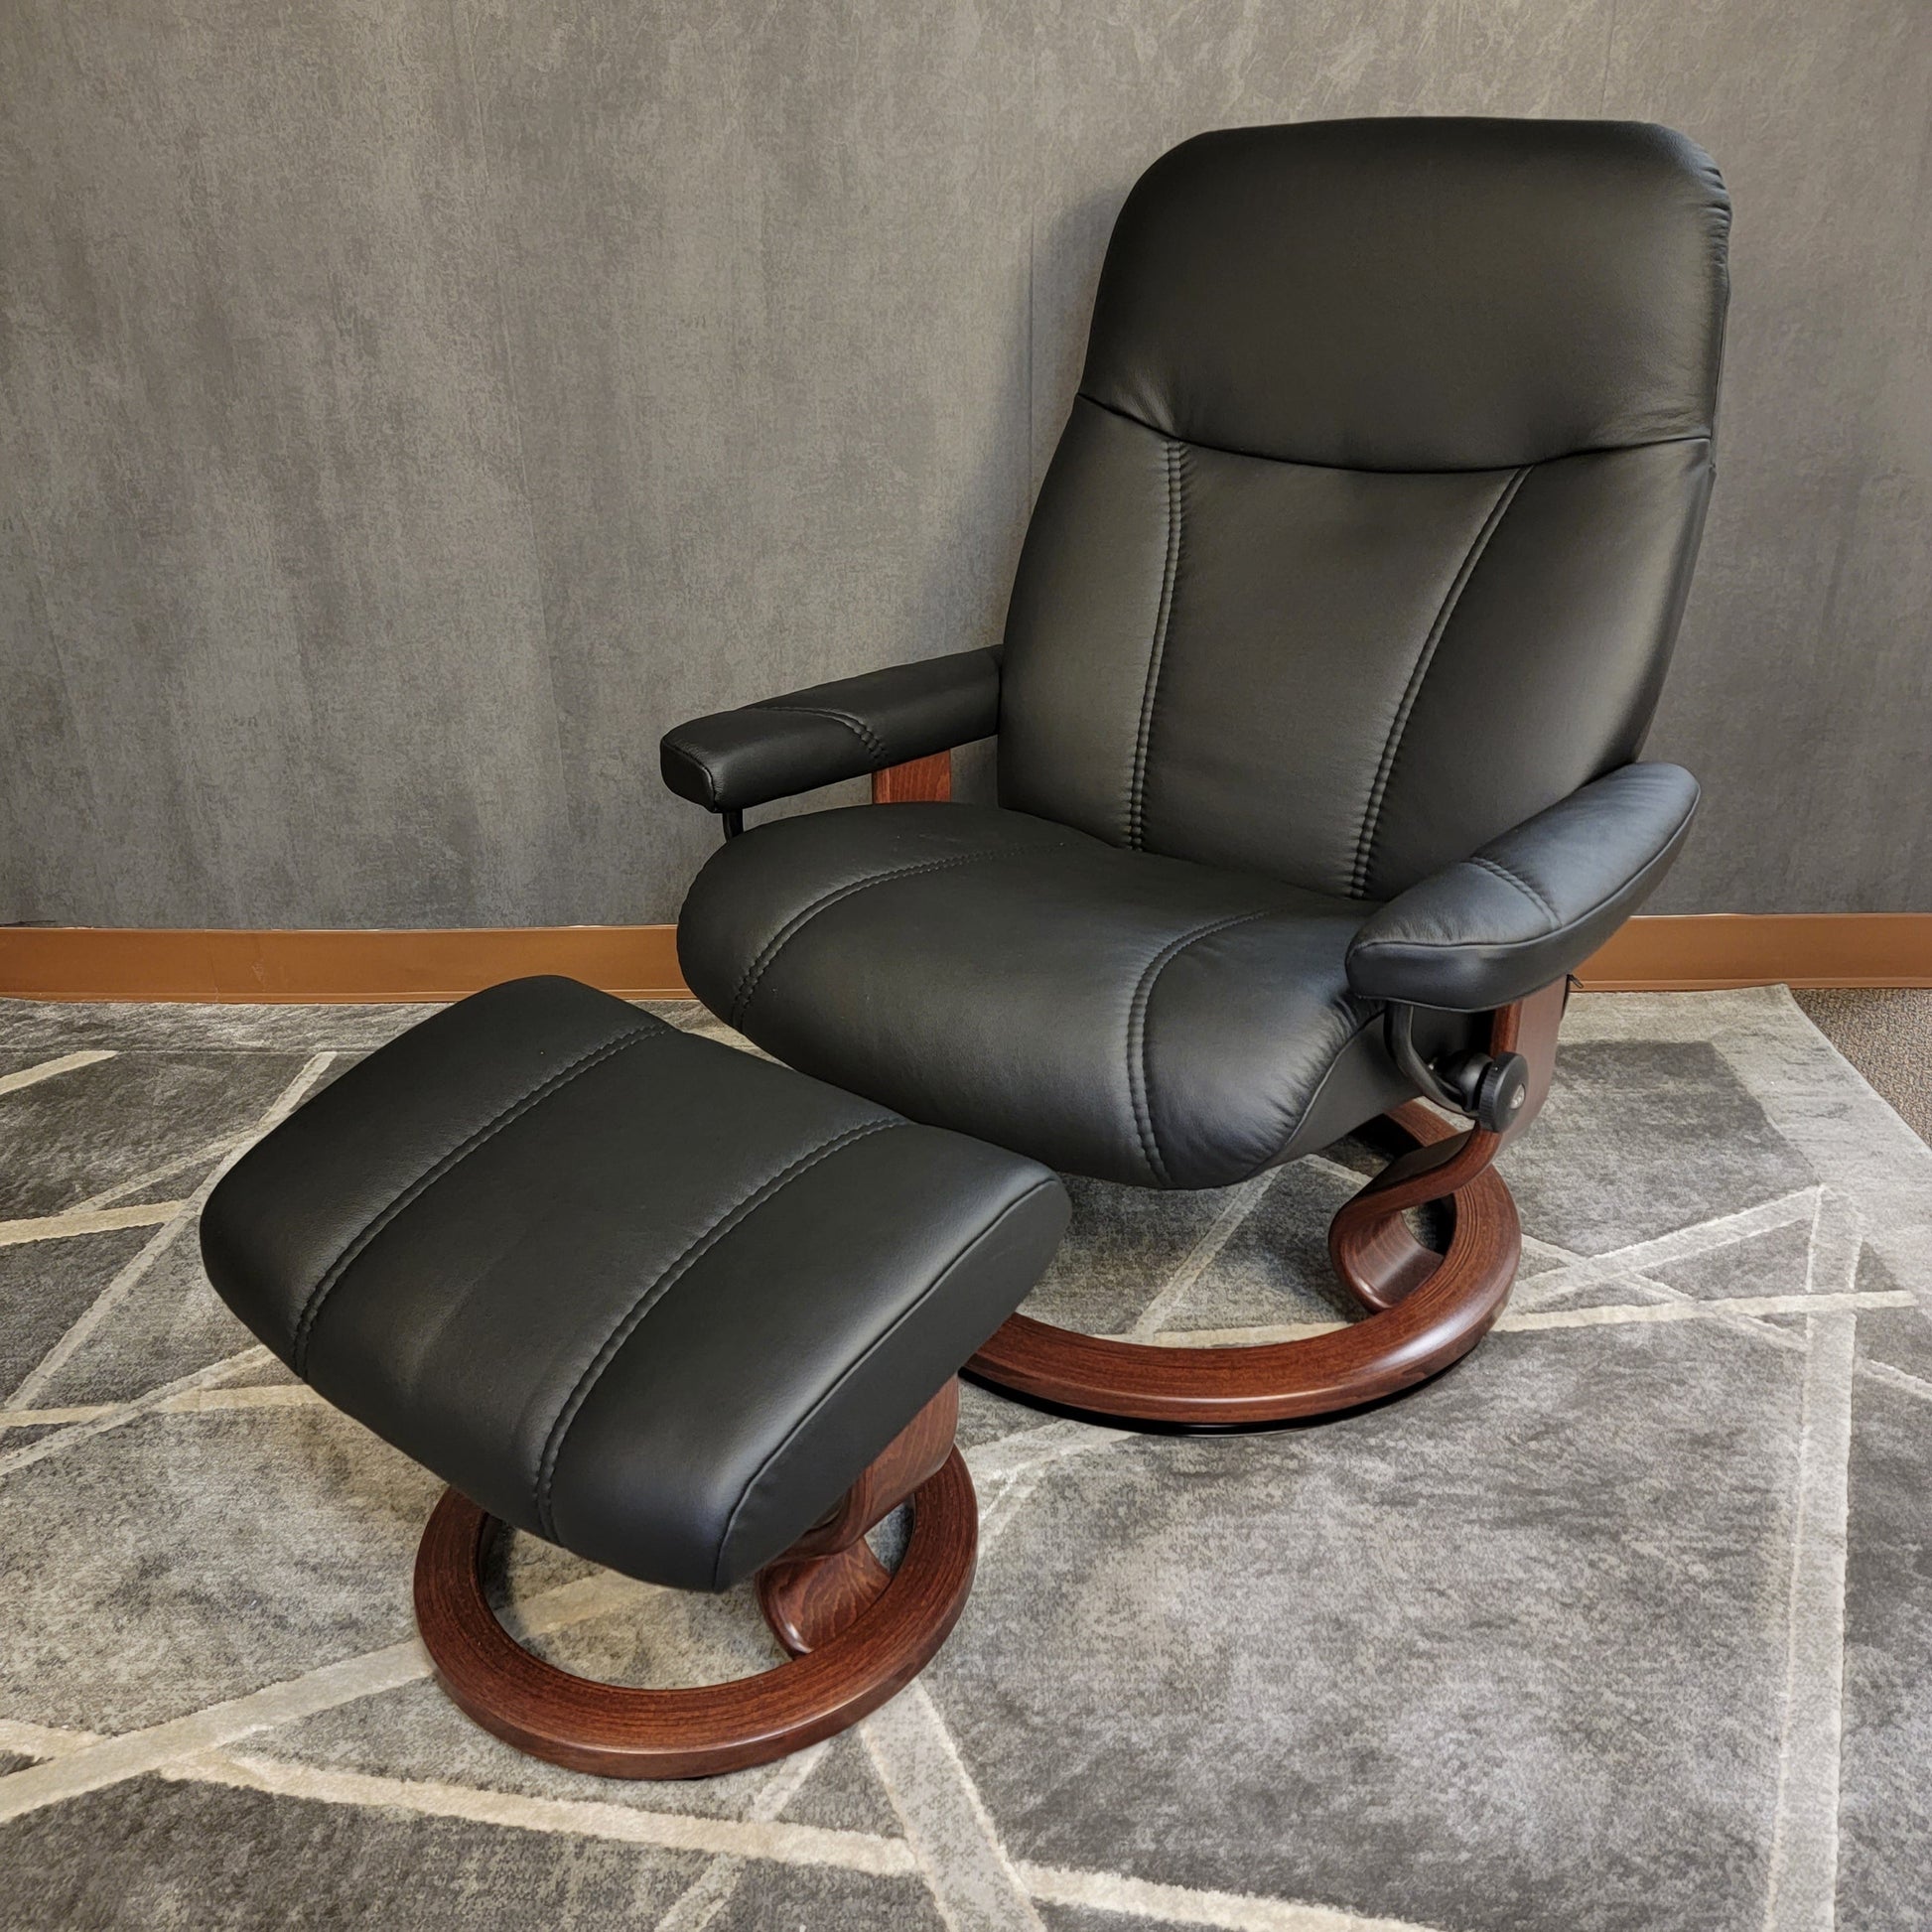 Stressless Consul Executive Office Desk Chair in Paloma Cream Leather